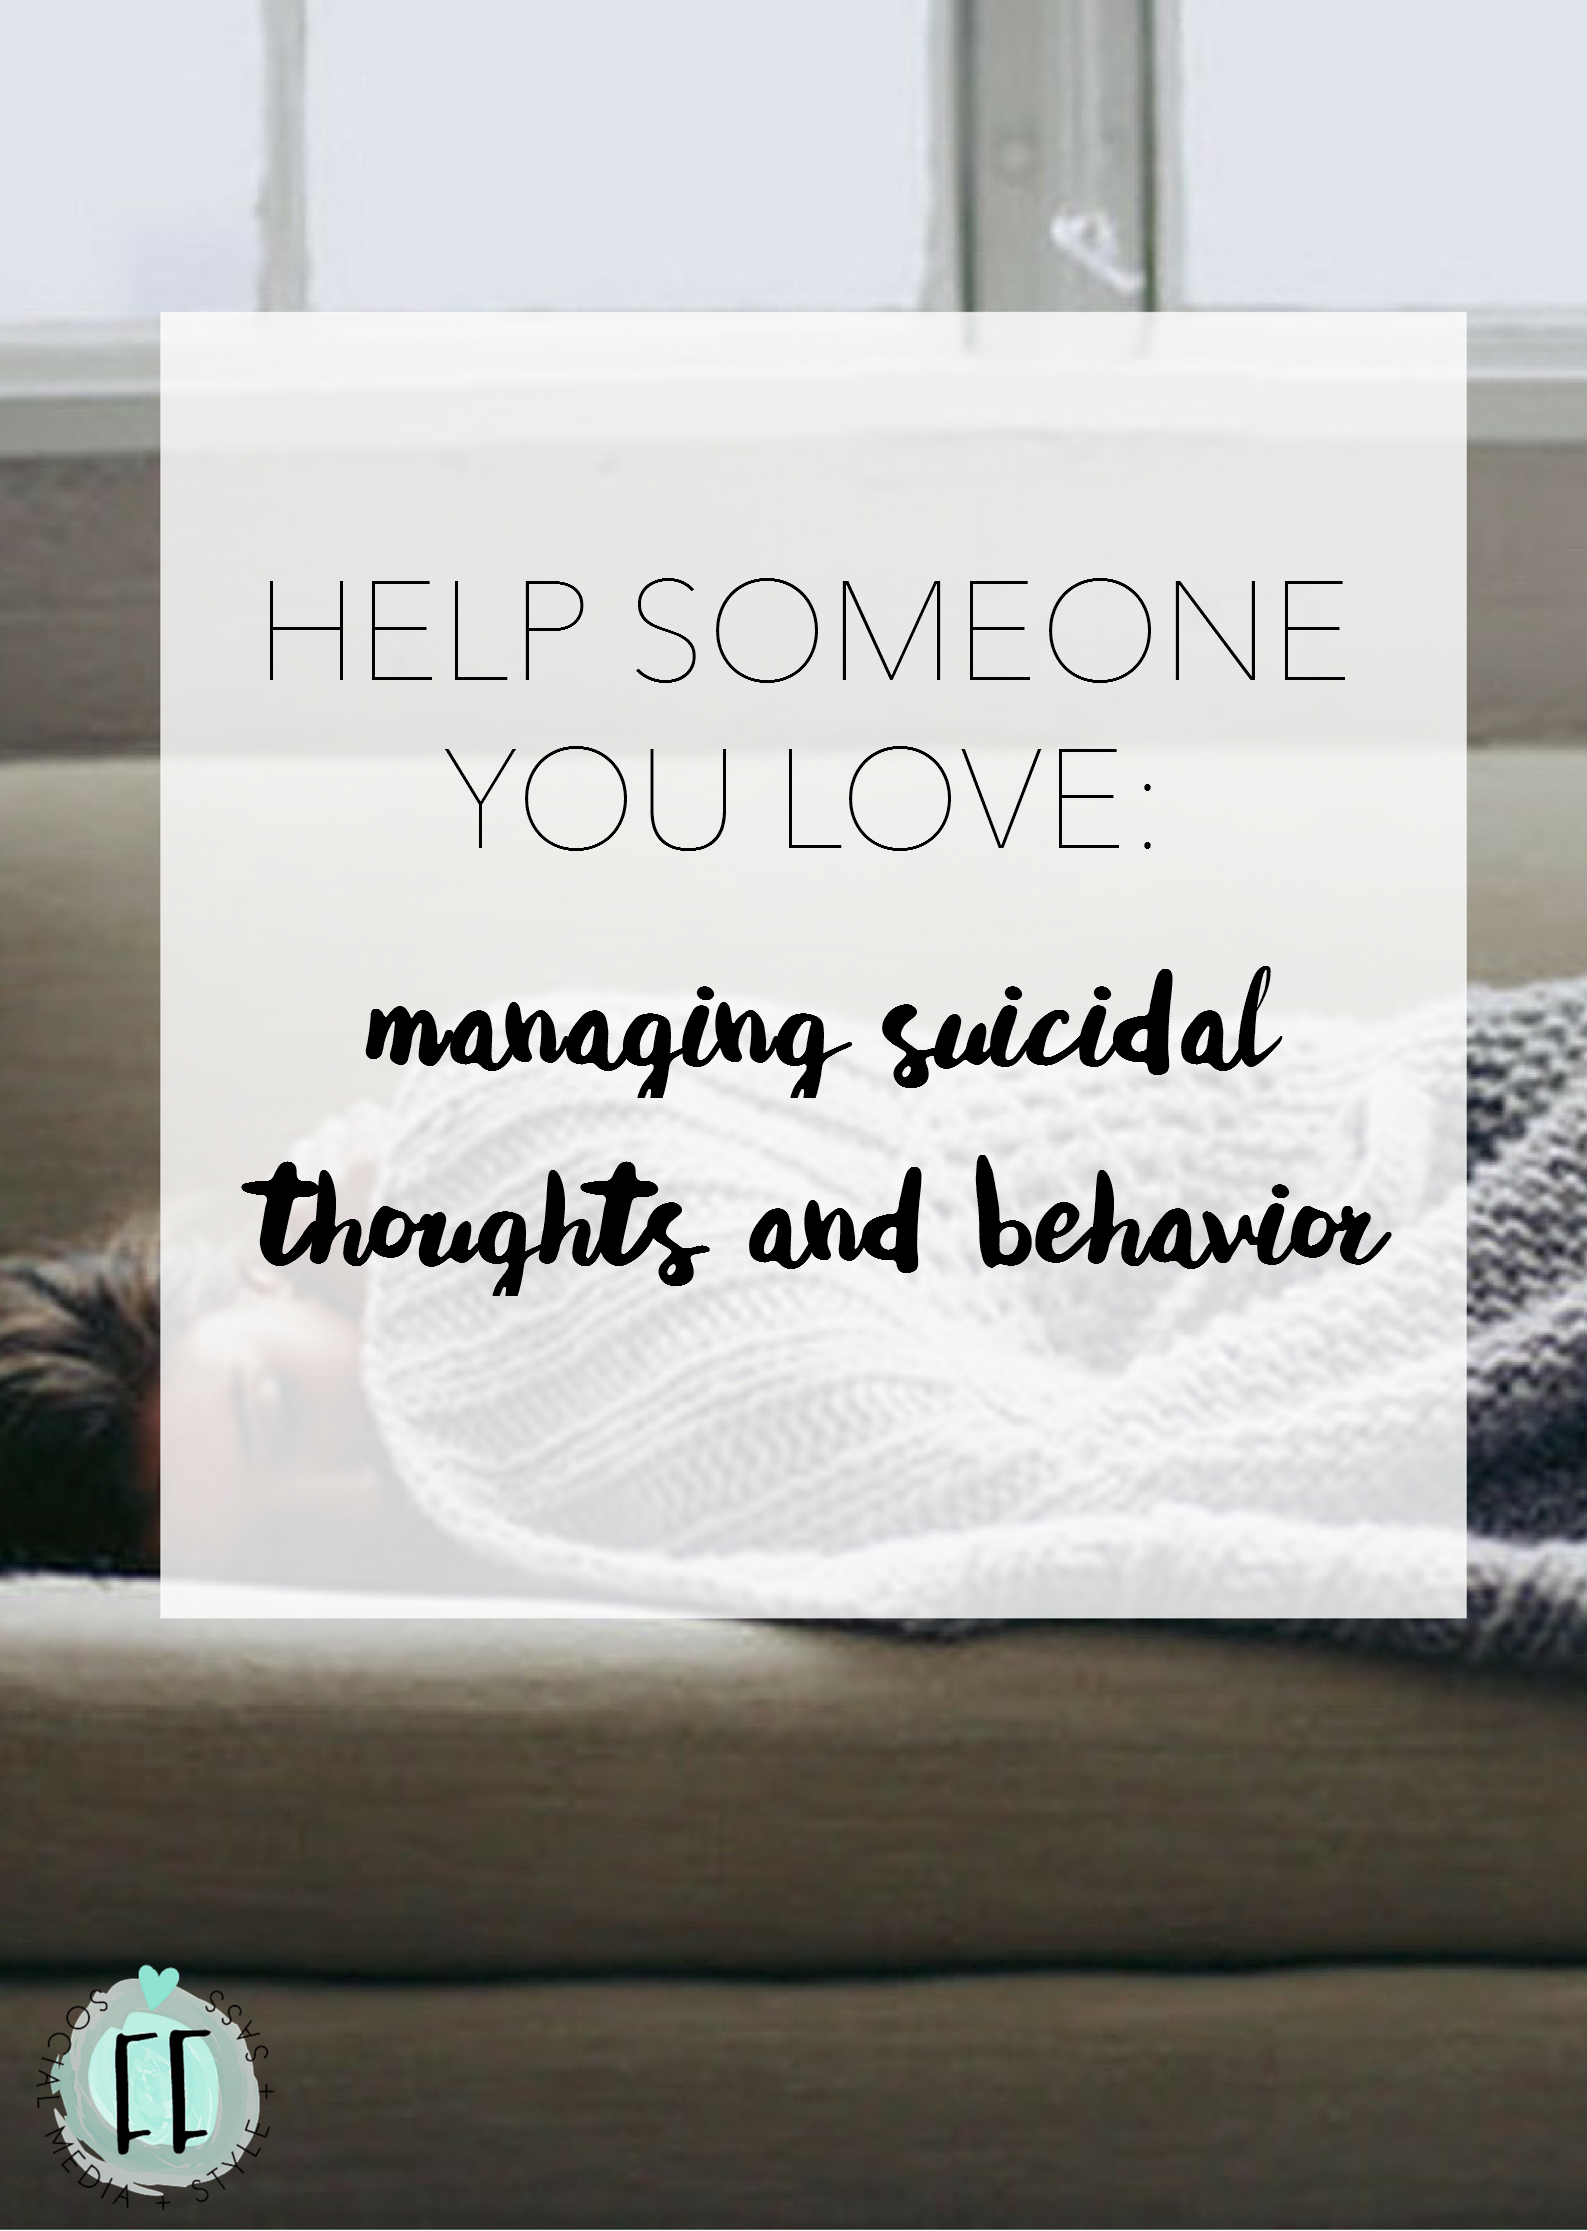 managing suicidal thoughts and behavior: how to help someone you